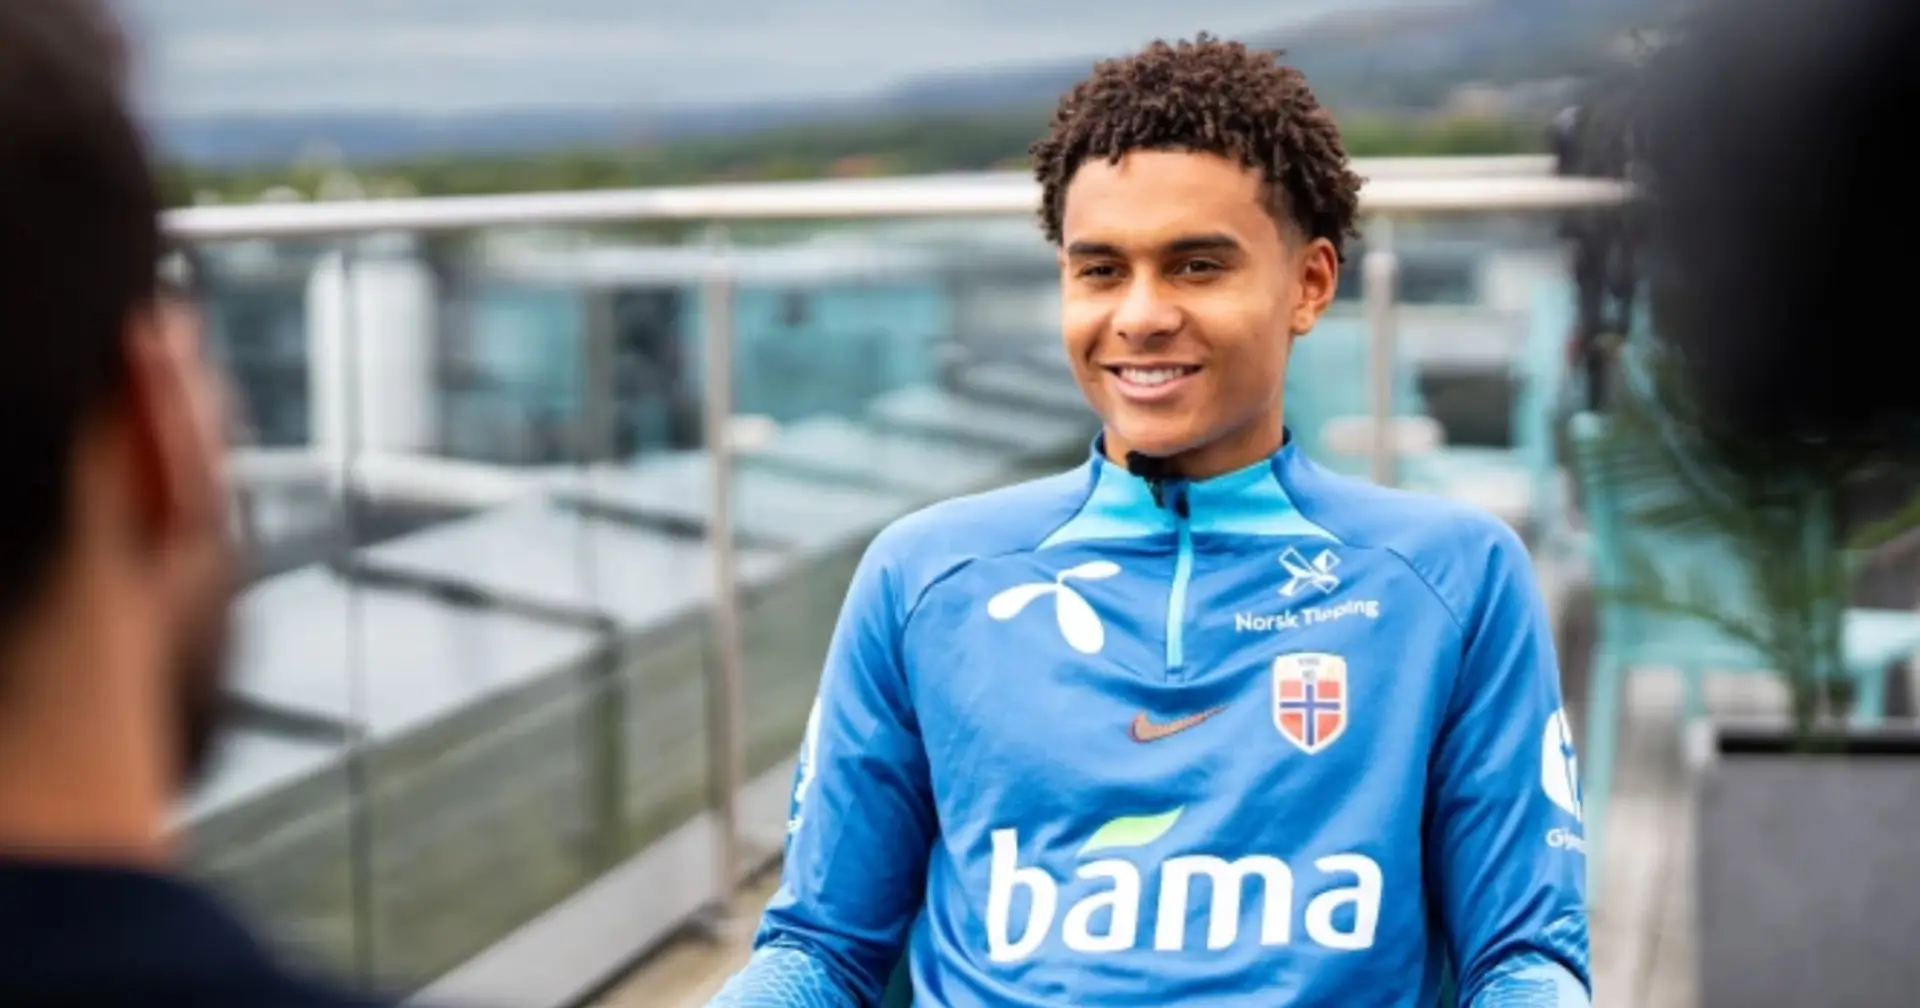 'We were on the same page': Brugge teenager Nusa on failed €30m Chelsea move